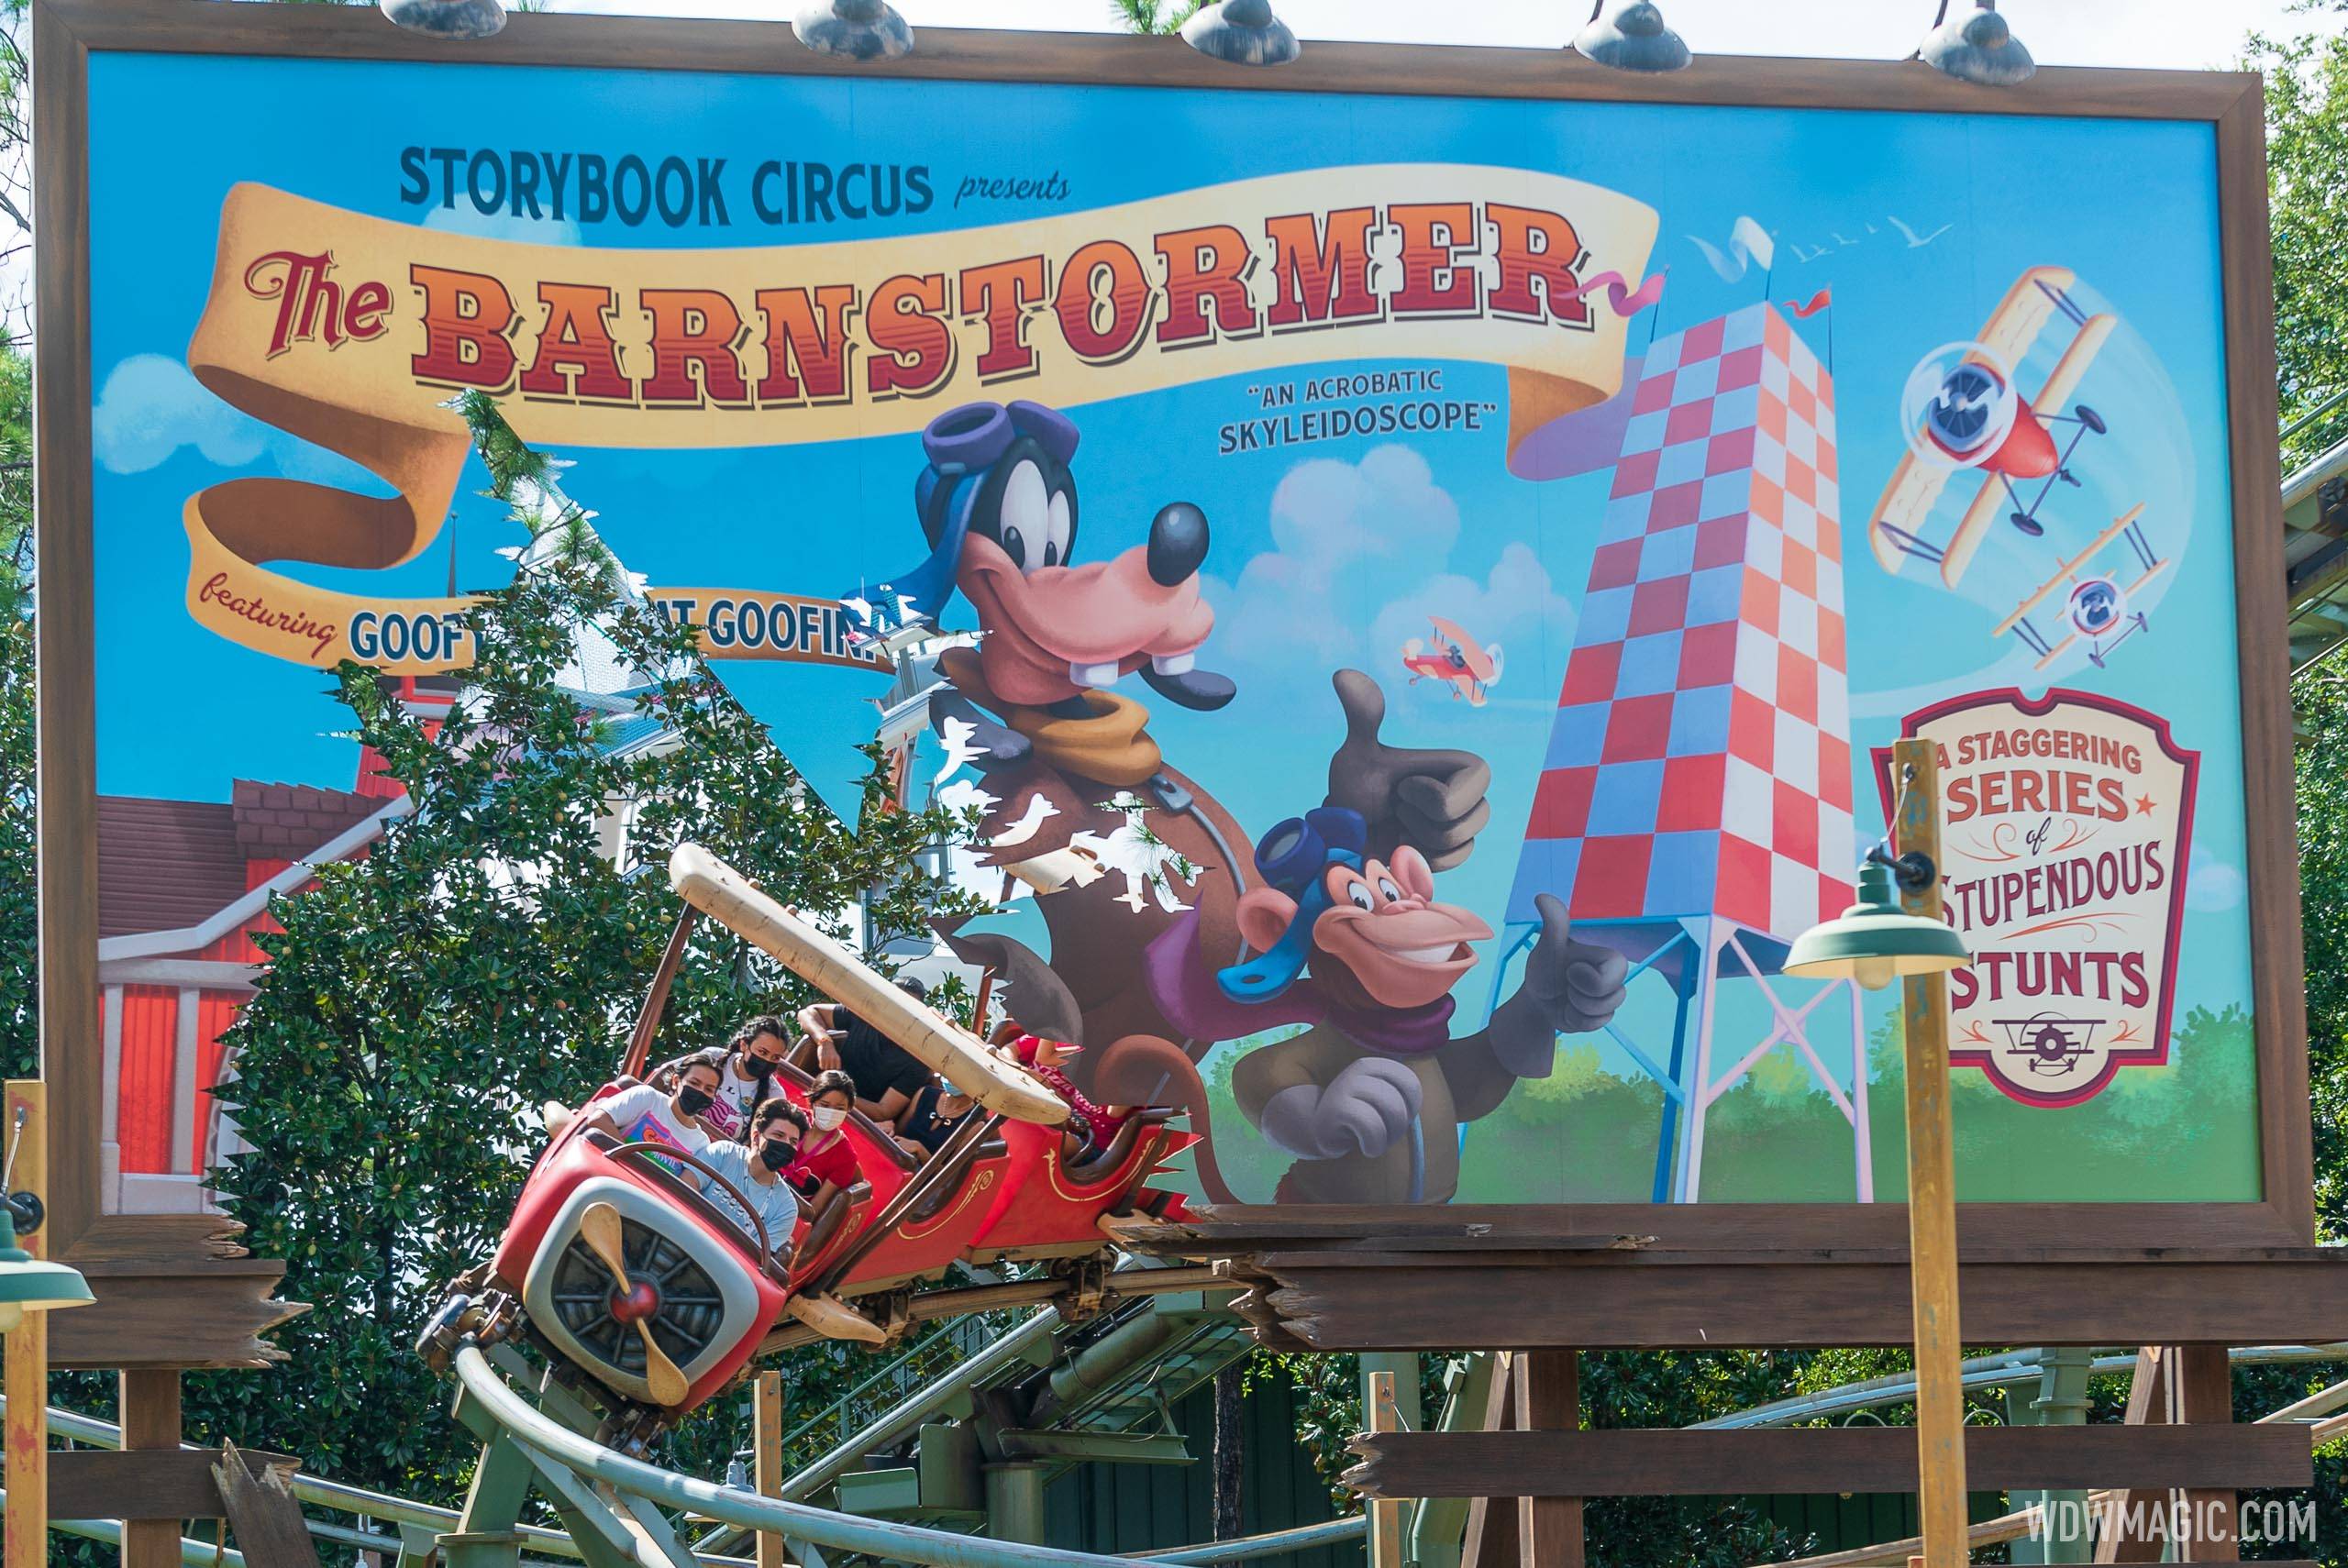 Masks will no longer be required on outdoor coasters like Barnstormer